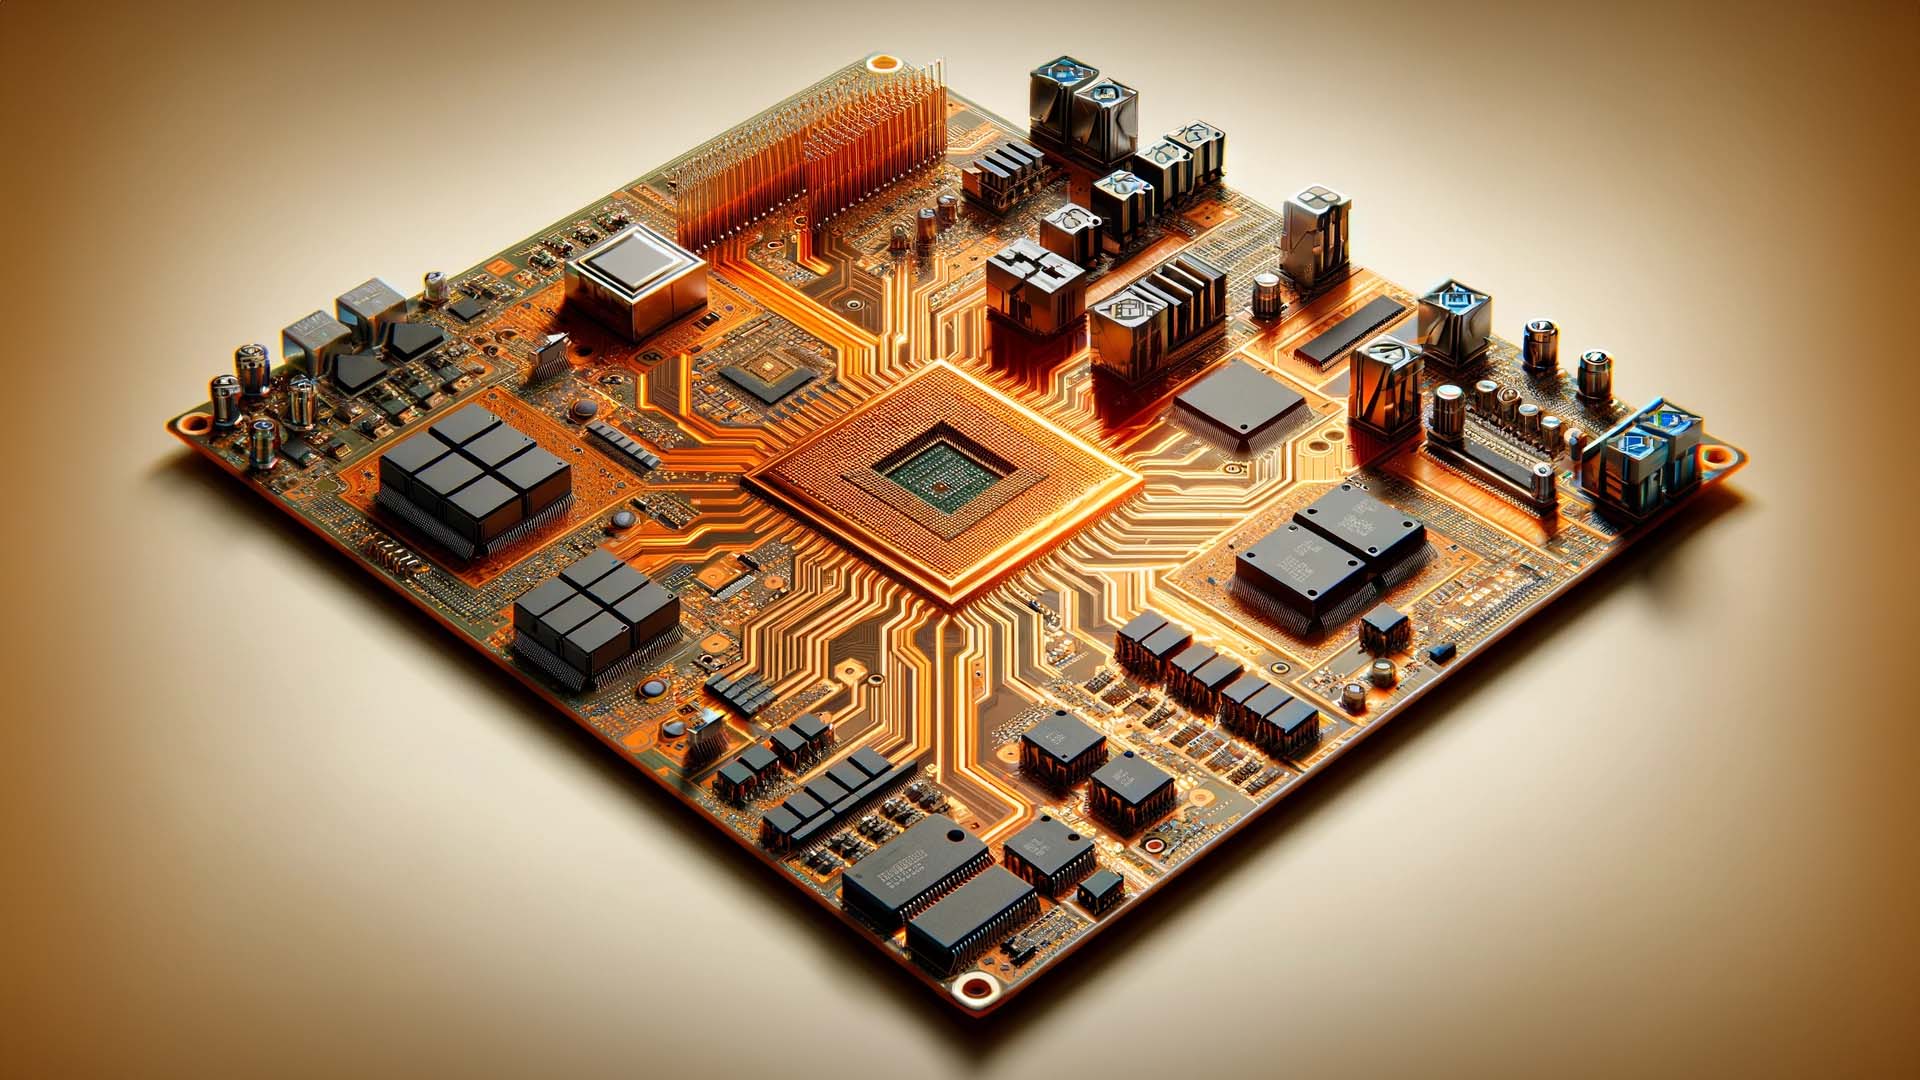 Realistic image of an advanced printed circuit board (PCB) with an array of electronic components and a distinctive orange color theme.